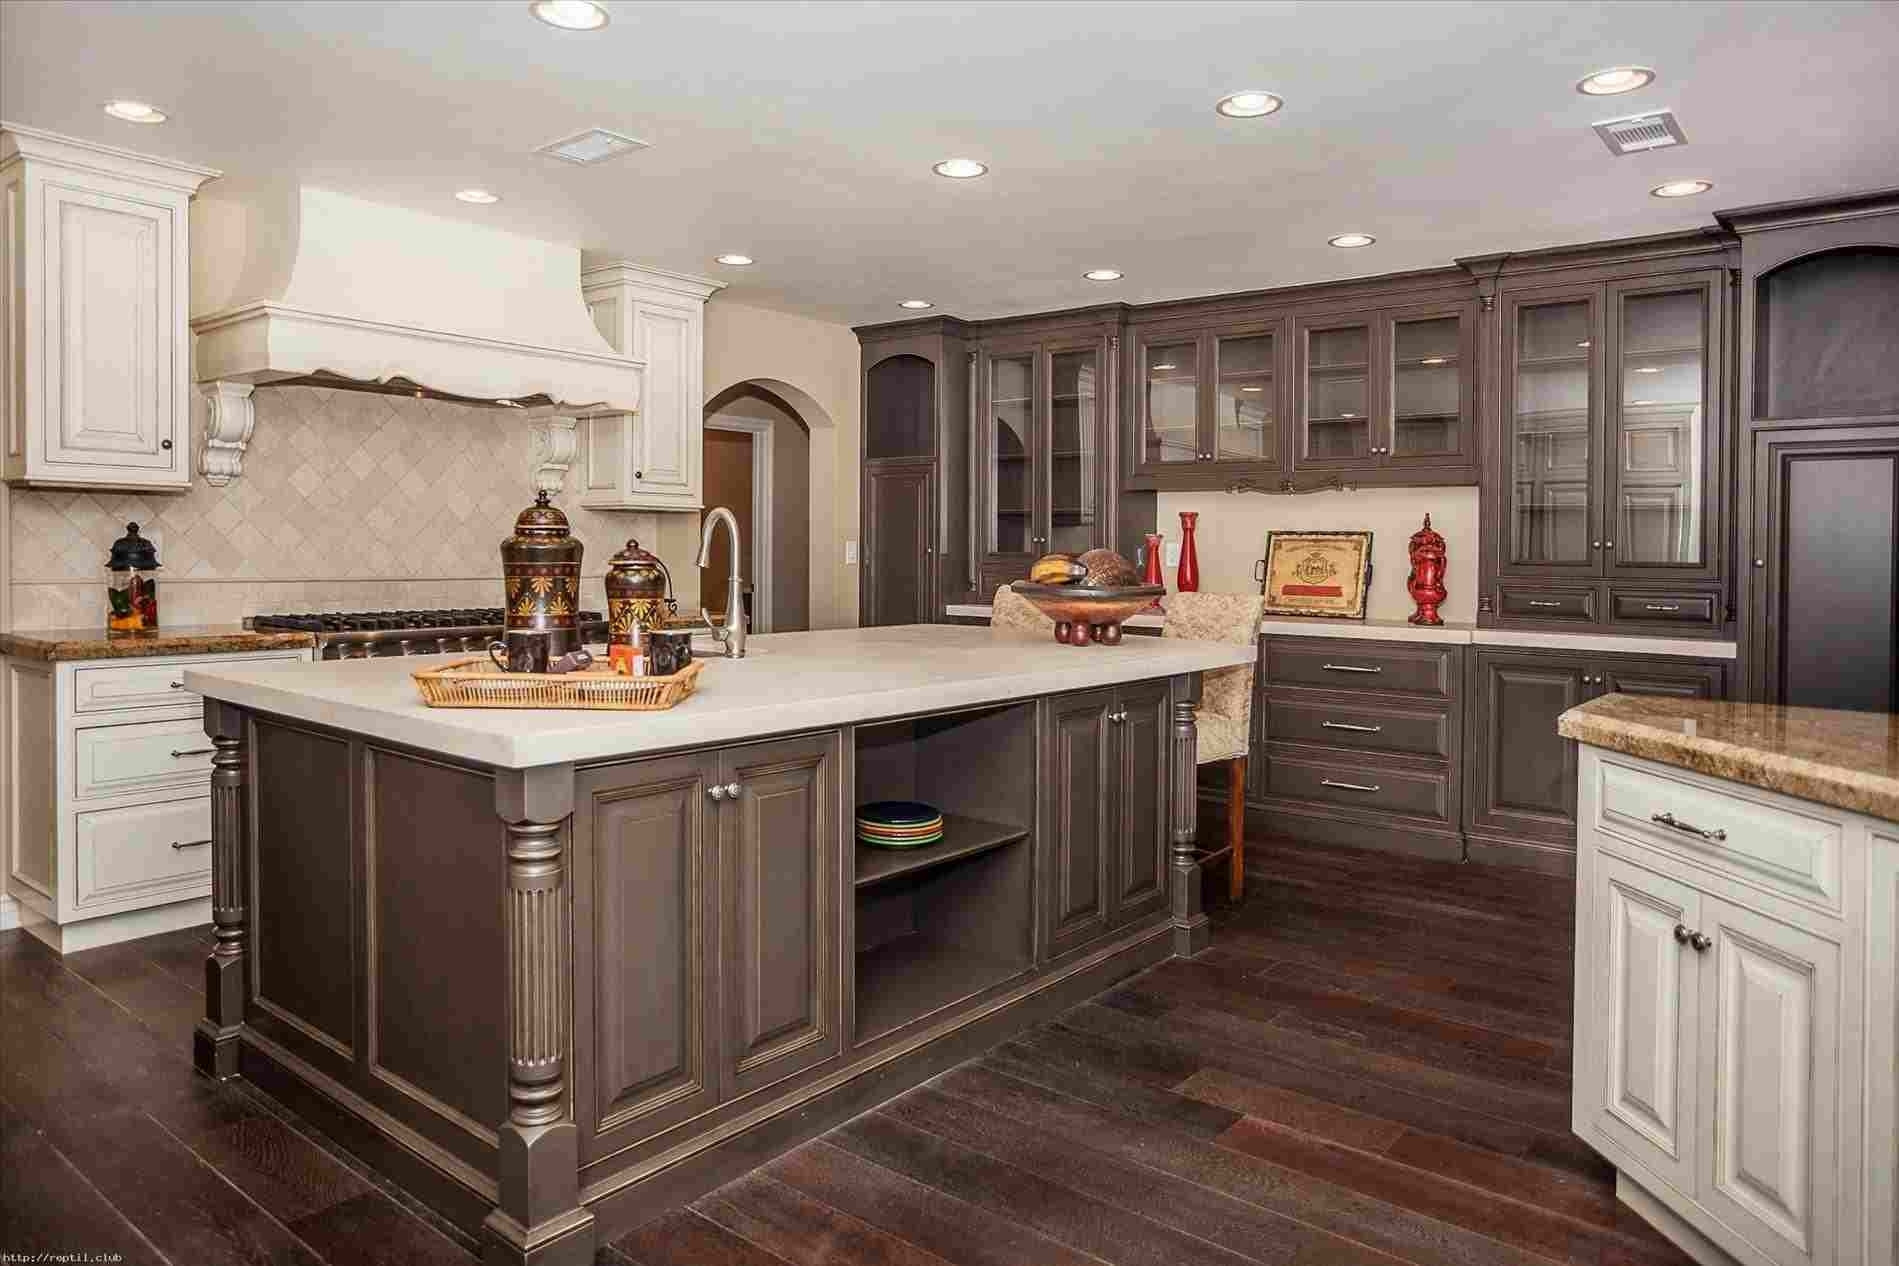 30 Trendy Hardwood Floors with Dark Cabinets 2023 free download hardwood floors with dark cabinets of beautiful white kitchen cabinets with tile floor realhi fi kitchen within white kitchen cabinets with wood tile floor